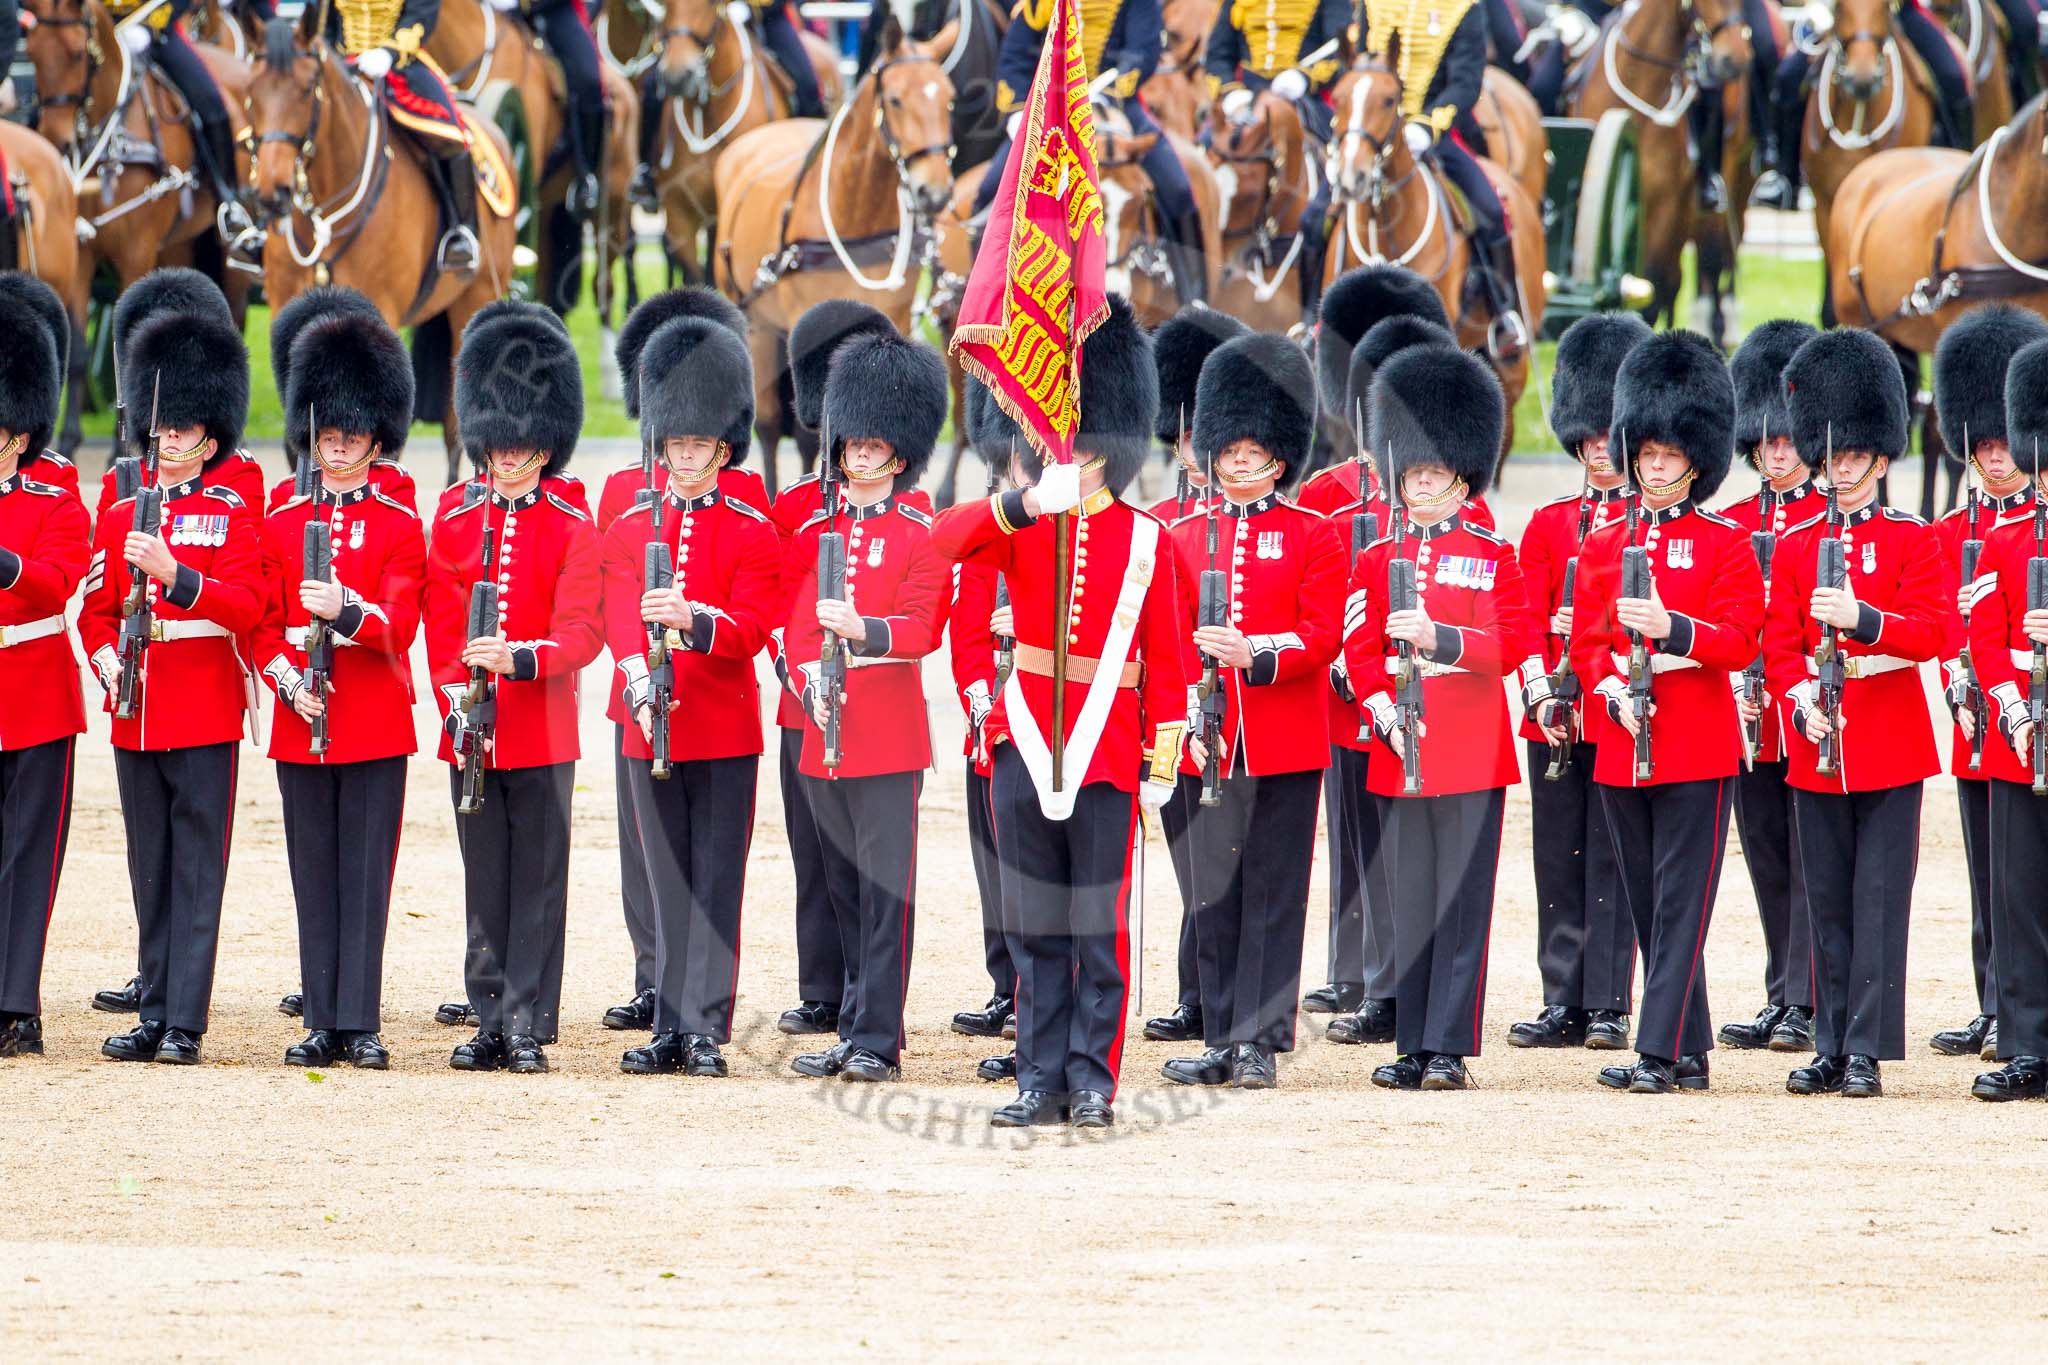 Trooping the Colour 2012: No. 1 Guard, the Escort to the Colour, presening arms, with the Ensign, Second Lieutenant Hugo Codrington, holding the Colour, in front..
Horse Guards Parade, Westminster,
London SW1,

United Kingdom,
on 16 June 2012 at 11:29, image #360